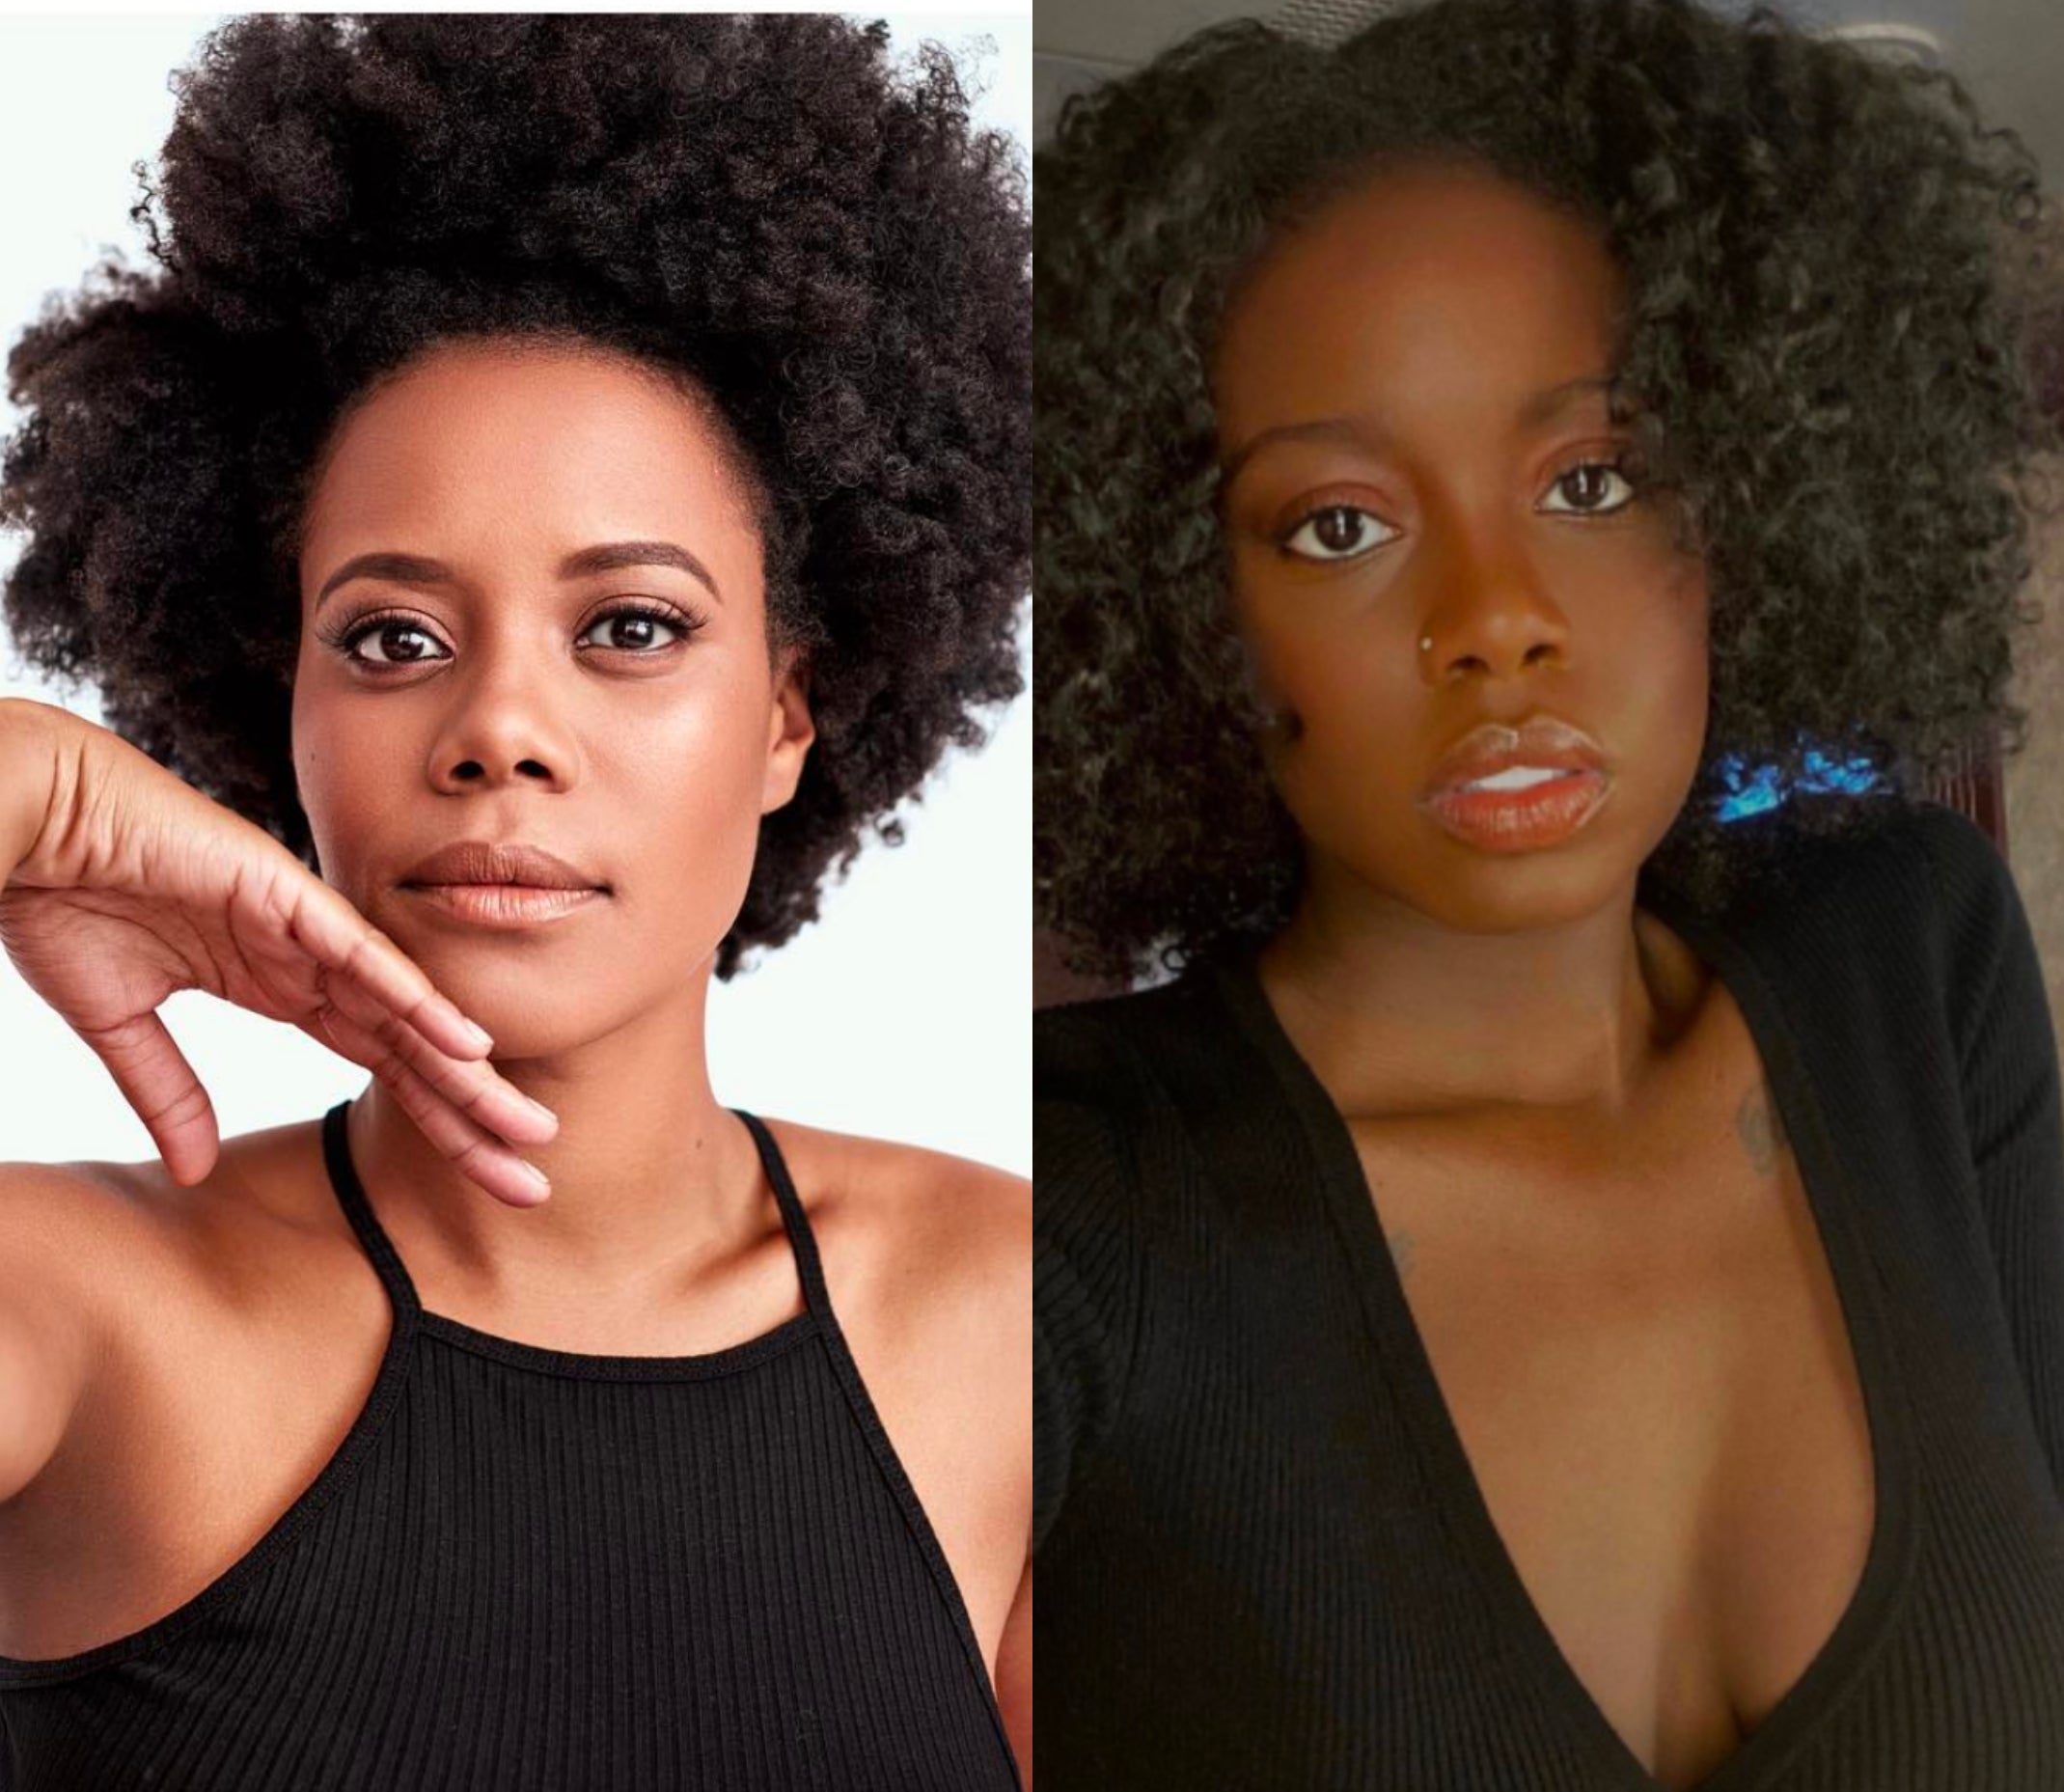 How Christina Elmore & Birgundi Baker Reacted To Those Shocking Moments On 'Insecure' And 'The Chi'